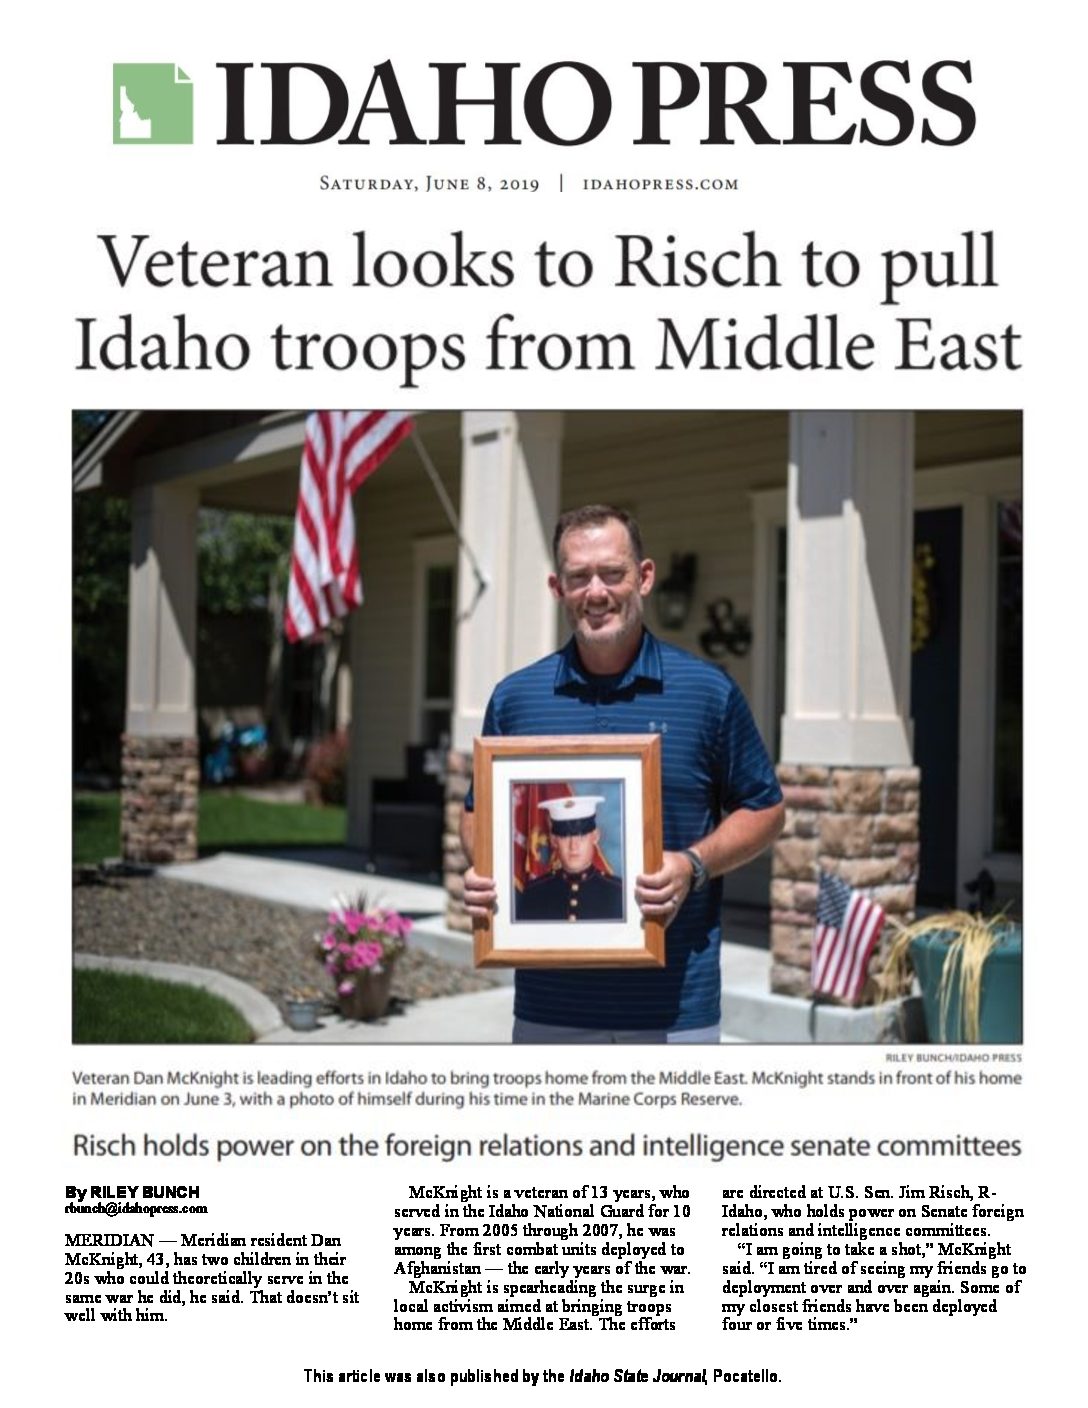 Idaho Press – Dan McKnight Feature pages 1 and 2